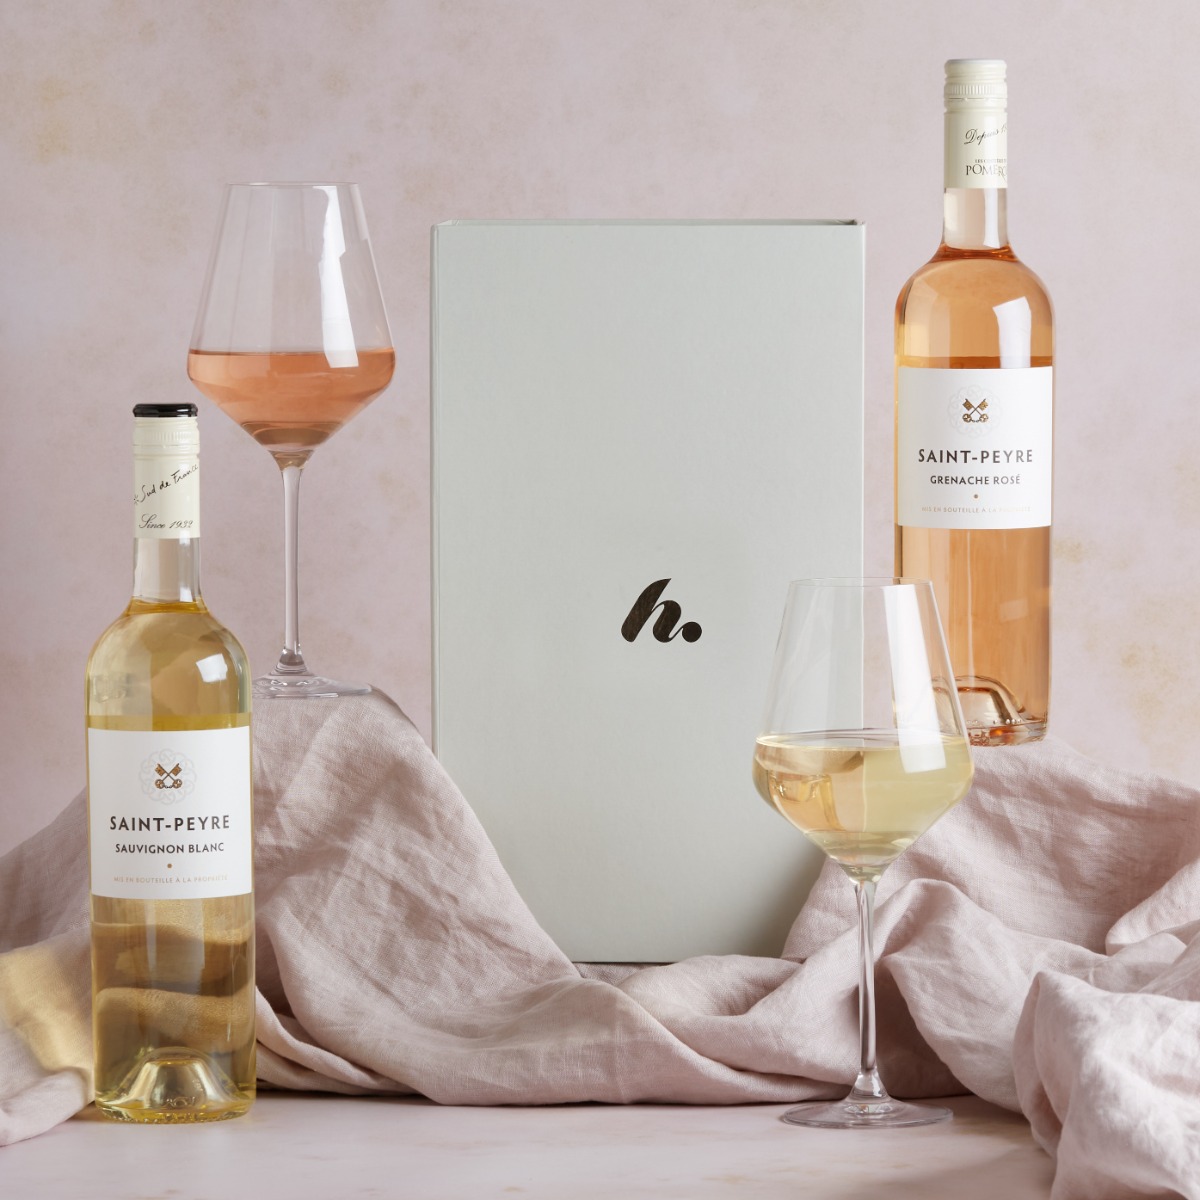 White & Rosé Wine Duo Wine Gifts UK Hampers.com